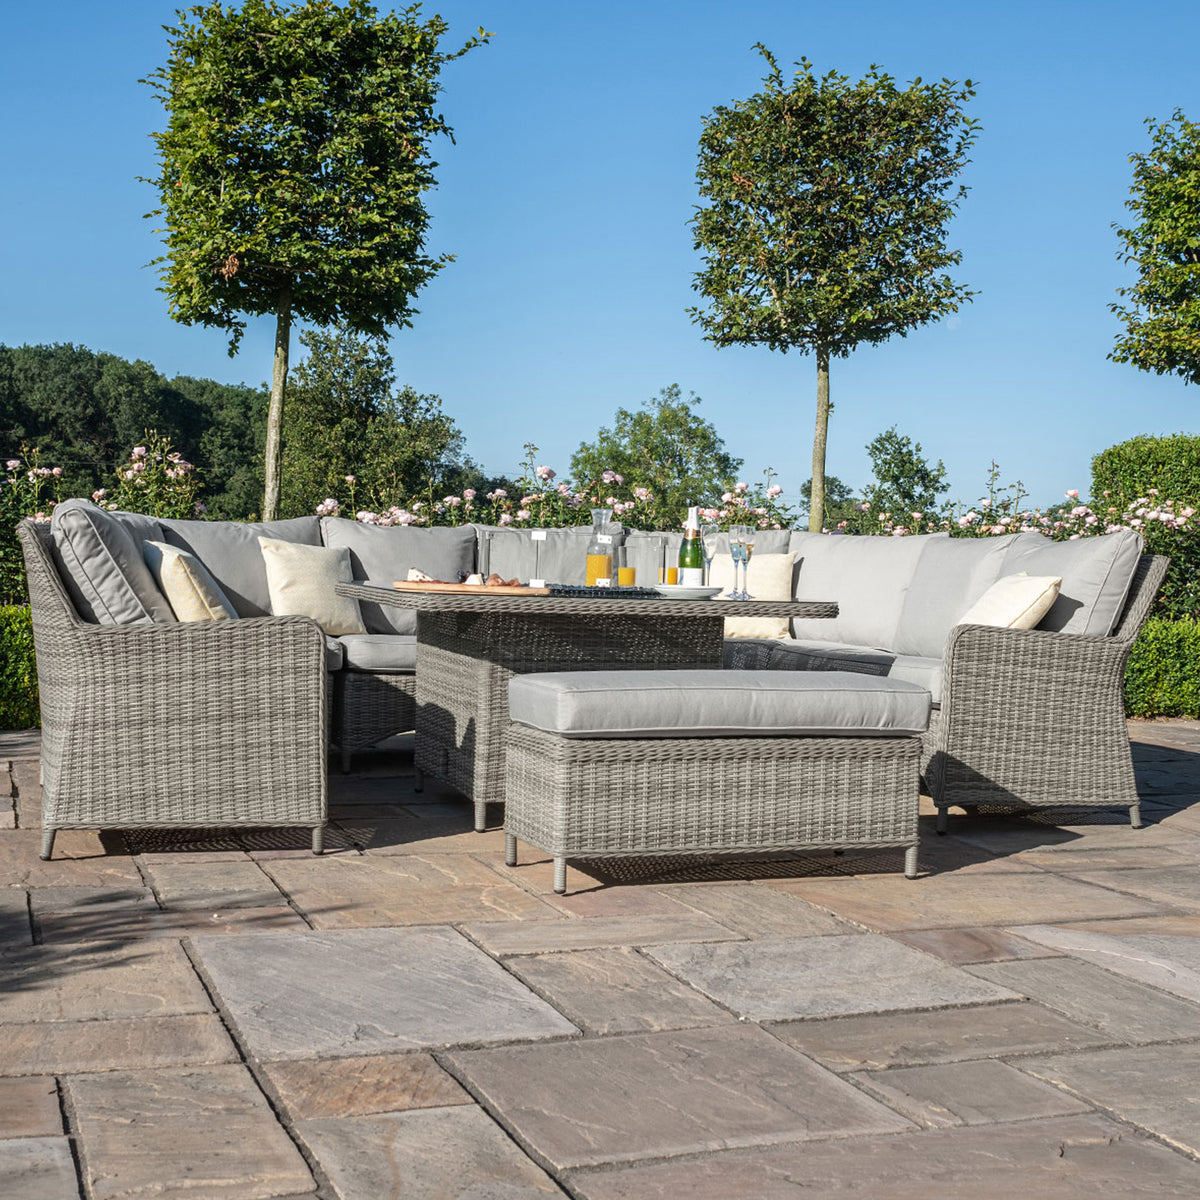 Maze Oxford Royal U-Shaped Outdoor Sofa Set with Fire Pit from Roseland Furniture